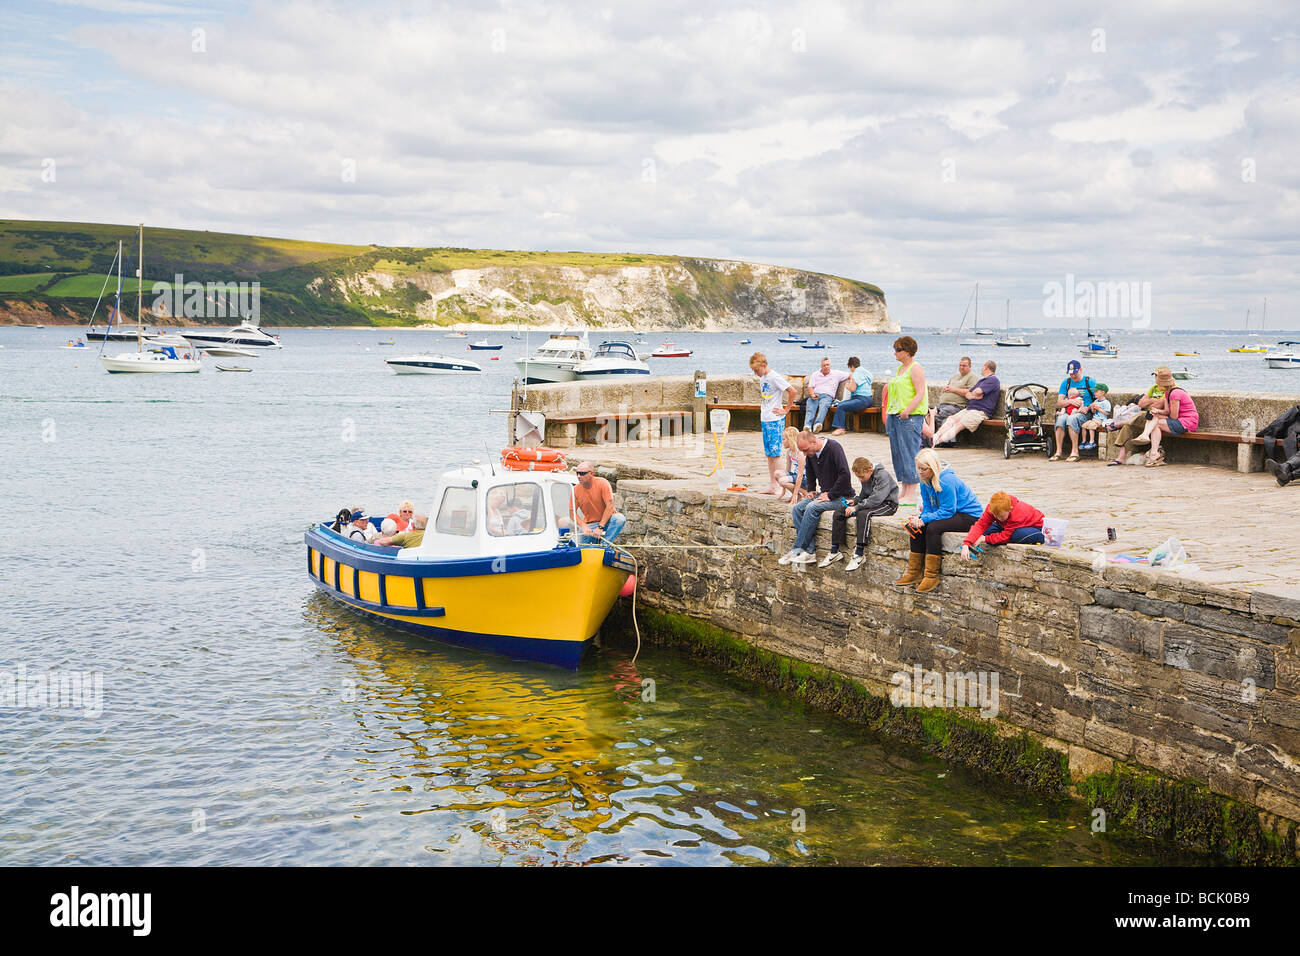 Families crabbing off the harbour wall and a boat for pleasure trips around the bay.  Seaside town of Swanage, Dorset. UK Stock Photo